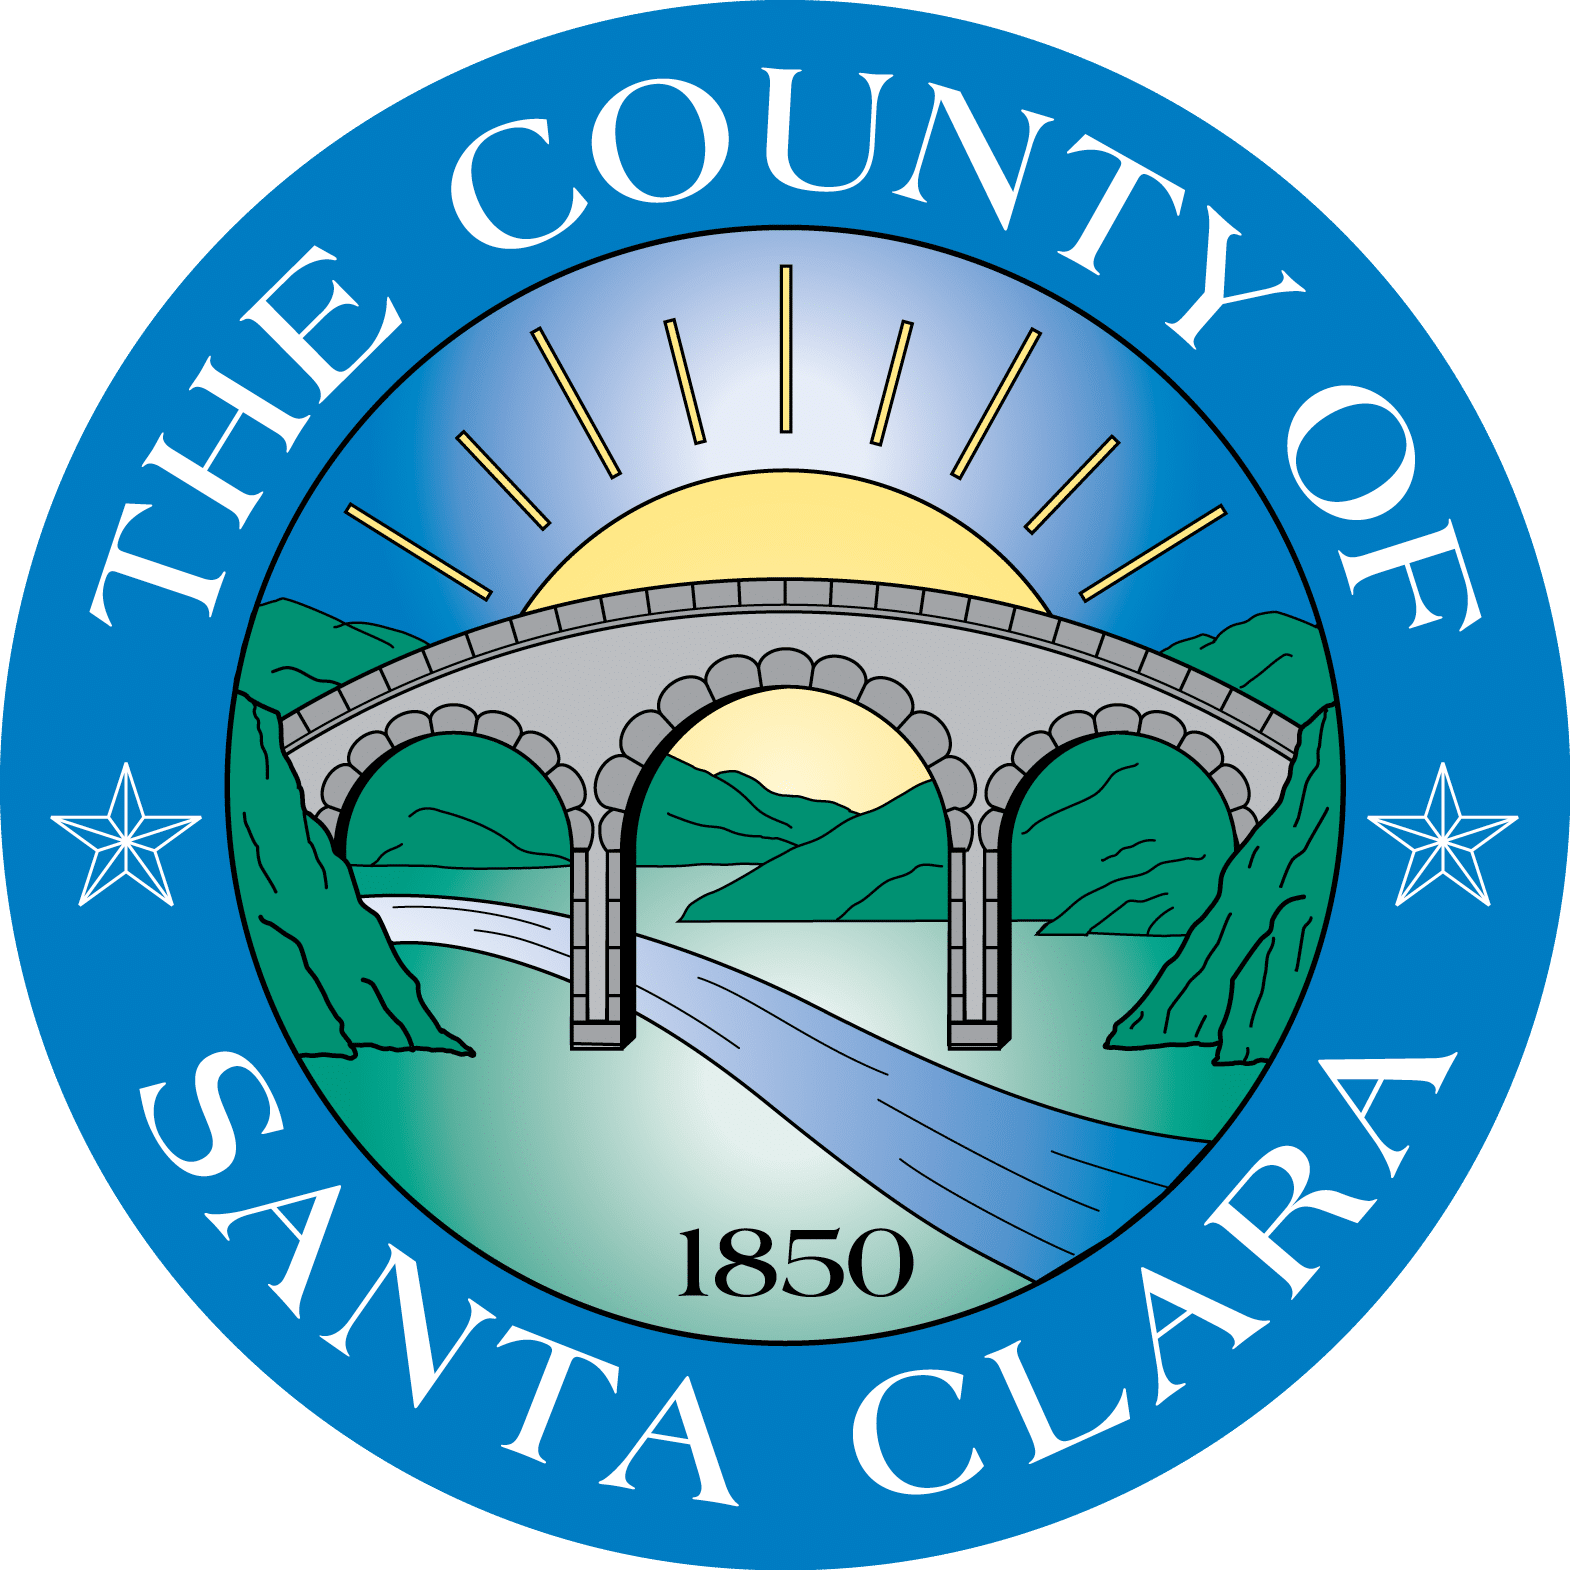 Dismiss Your Traffic Ticket In Santa Clara County Ticket Snipers®